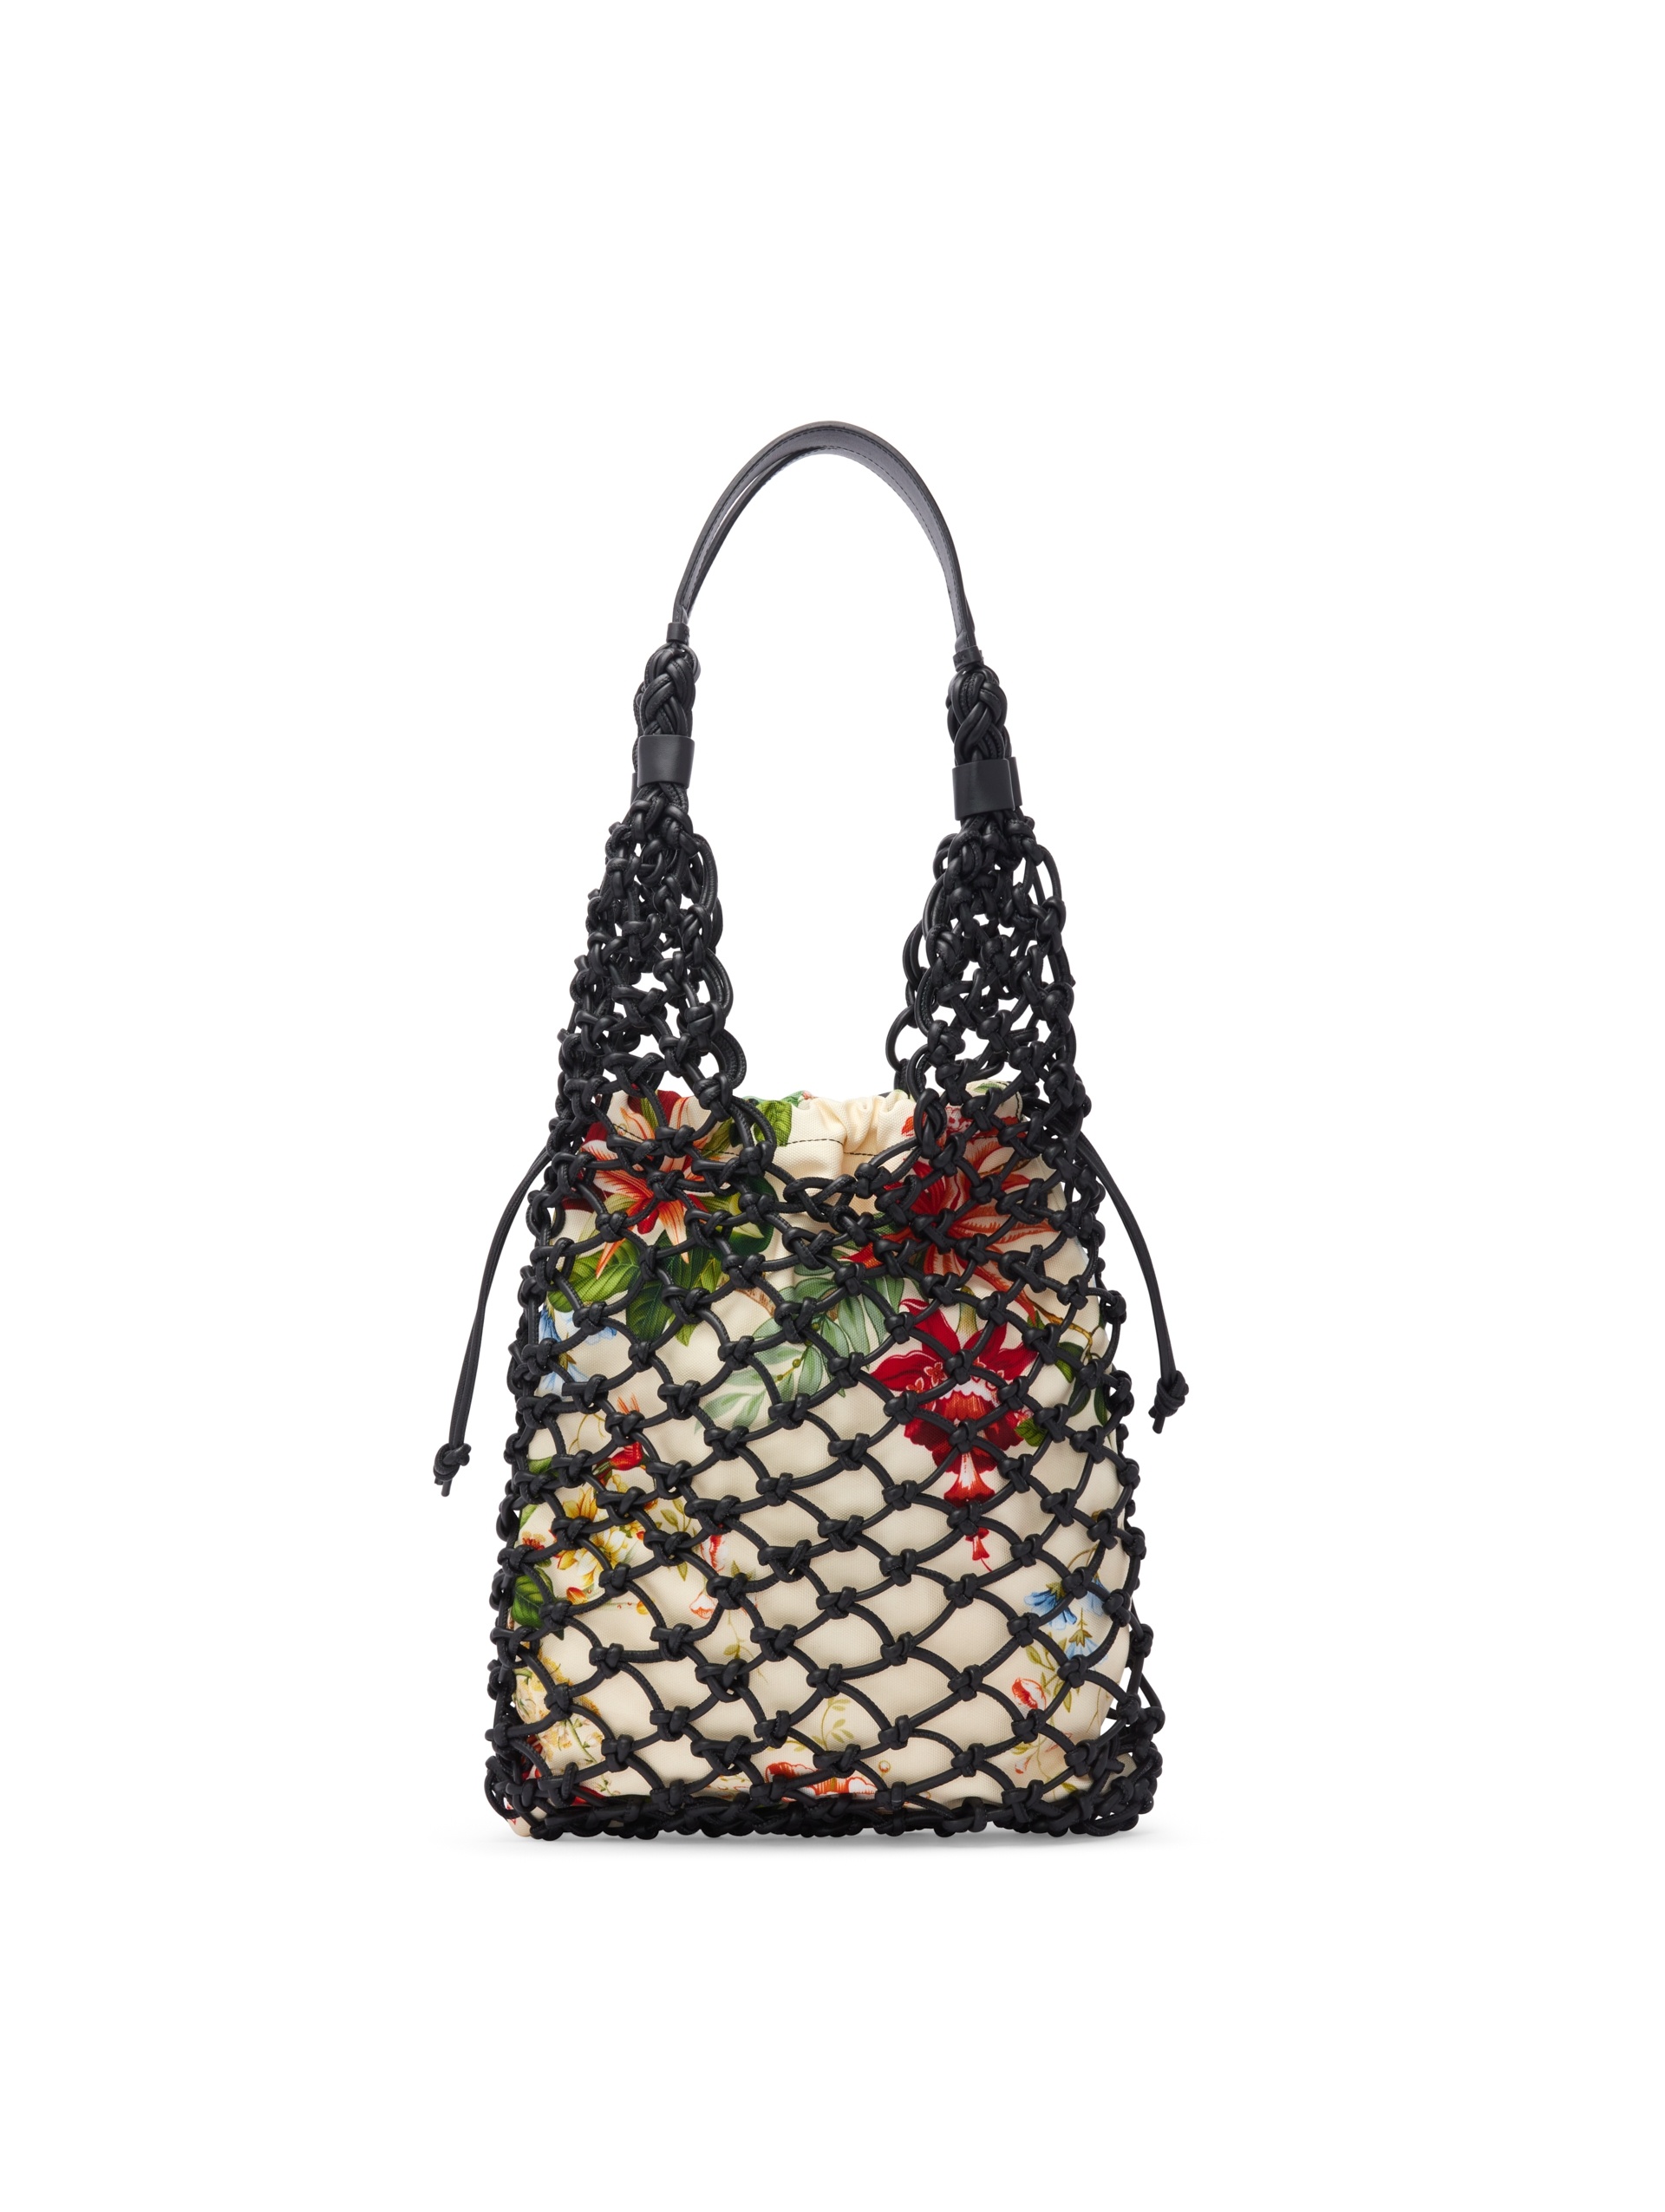 FLORA & FAUNA LARGE KNOTTED LEATHER TOTE - 1